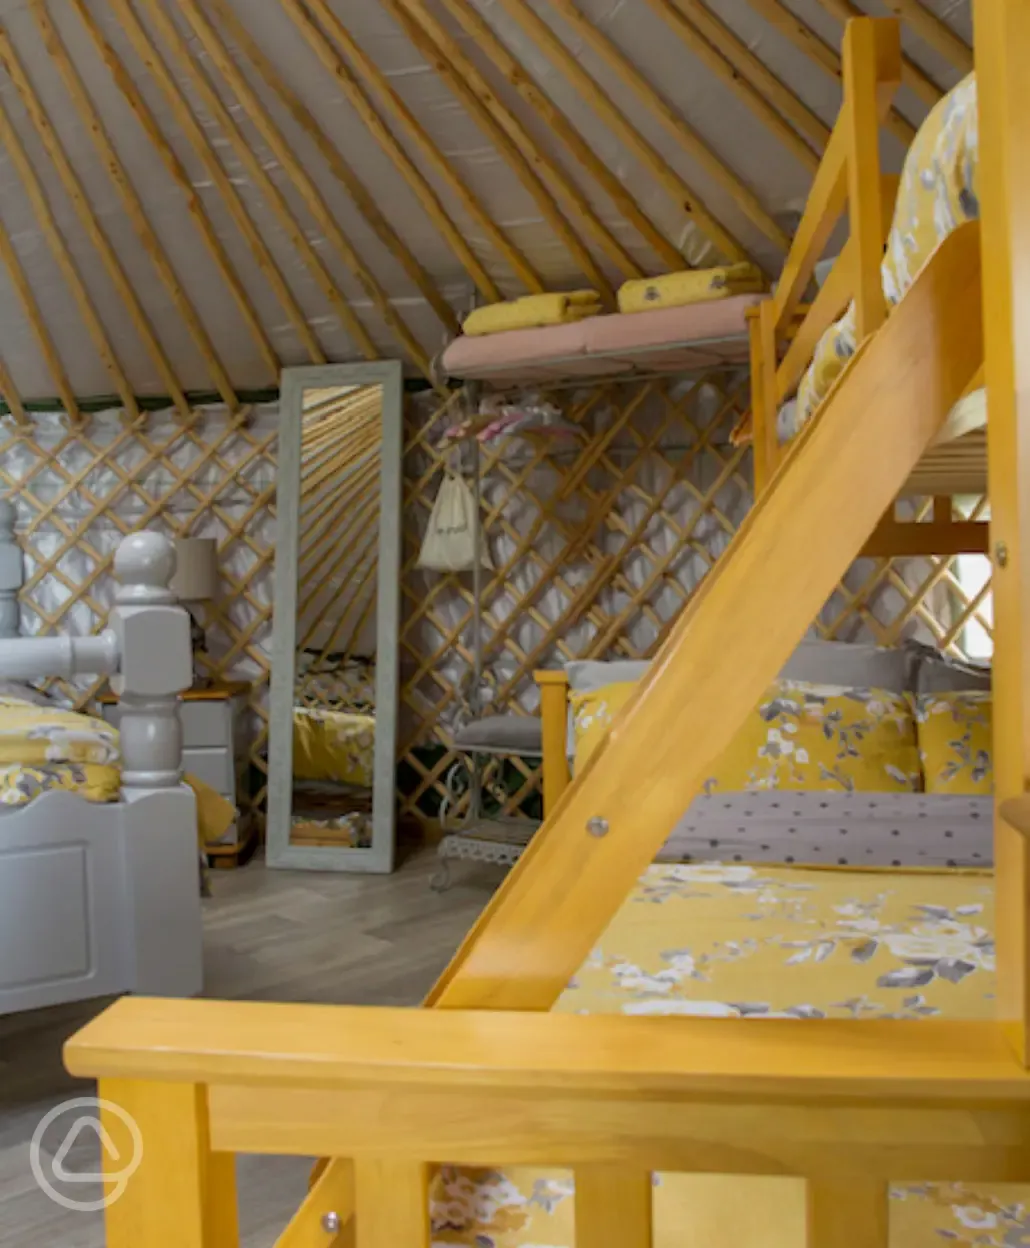 Silver Birch yurt with hot tub triple bunk bed